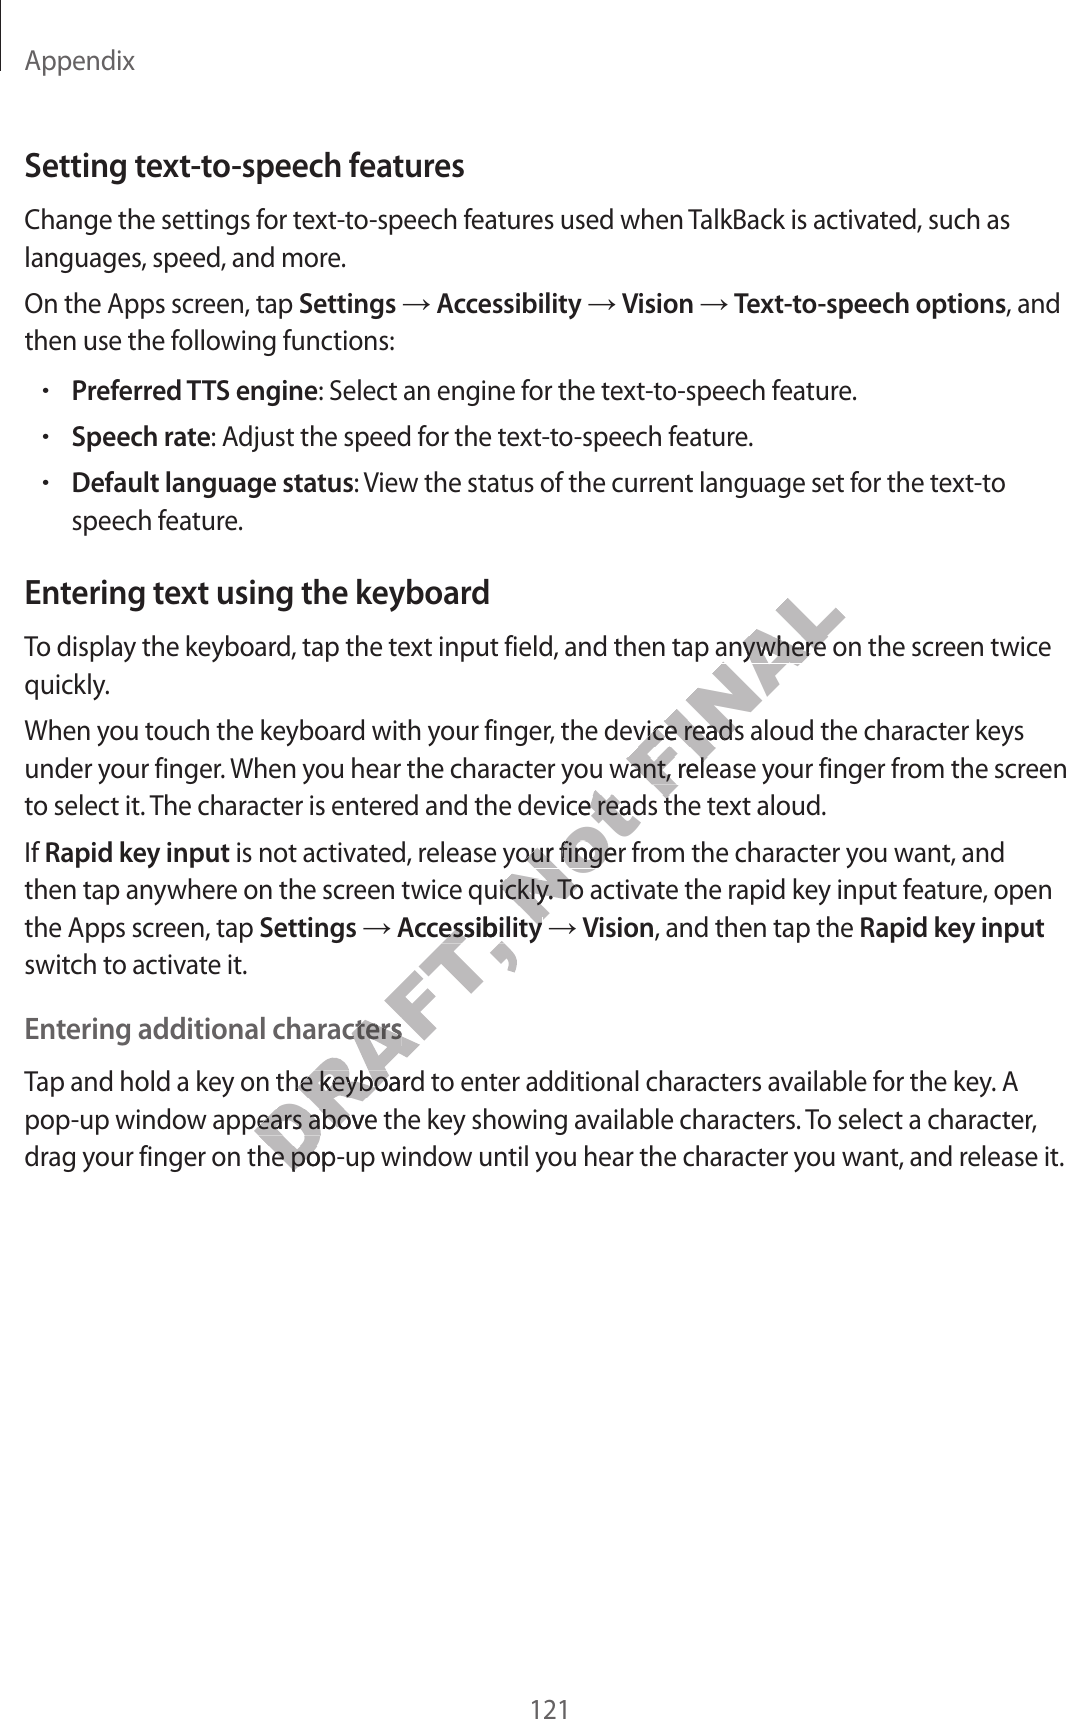 Appendix121Setting text-to-speech featur esChange the settings for t ext-to-speech featur es used when TalkBack is activated , such as languages, speed , and mor e .On the Apps screen, tap Settings  Accessibility  Vision  Text-to-speech options, and then use the follo wing functions:•Preferred TTS engine: Select an engine f or the t ext-to-speech featur e .•Speech rat e: Adjust the speed f or the t ext-to-speech featur e .•Default language status: View the status of the curr ent language set for the text-to speech featur e.Entering t e xt using the keyboardTo display the keyboar d , tap the text input field, and then tap an ywhere on the scr een twice quickly.When you t ouch the keyboar d with y our finger, the device reads aloud the character keys under your finger. When you hear the character you wan t, r elease y our finger fr om the scr een to select it. The character is enter ed and the devic e r eads the te xt aloud.If Rapid key input is not activated, r elease y our finger fr om the character y ou want , and then tap anywhere on the scr een twice quickly. To activat e the rapid key input f ea tur e , open the Apps screen, tap Settings  Accessibility  Vision, and then tap the Rapid key input switch to activate it.Entering additional char actersTap and hold a key on the keyboard to ent er additional characters av ailable f or the key. A pop-up window appears above the key showing a v ailable characters. To select a character, drag your finger on the pop-up window until y ou hear the character y ou want , and r elease it.DRAFT, AccessibilityDRAFT, AccessibilityEntering additional char actersDRAFT, Entering additional char actersDRAFT, Tap and hold a key on the keyboard to ent er additional characters av ailable f or the key. A DRAFT, Tap and hold a key on the keyboard to ent er additional characters av ailable f or the key. A pop-up window appears above the key showing a v ailable characters. To select a character, DRAFT, pop-up window appears above the key showing a v ailable characters. To select a character, DRAFT, drag your finger on the pop-up window until y ou hear the character y ou want , and r elease it.DRAFT, drag your finger on the pop-up window until y ou hear the character y ou want , and r elease it.Not under your finger. When you hear the character you wan t, r elease y our finger fr om the scr een Not under your finger. When you hear the character you wan t, r elease y our finger fr om the scr een to select it. The character is enter ed and the devic e r eads the te xt aloud.Not to select it. The character is enter ed and the devic e r eads the te xt aloud. is not activated, r elease y our finger fr om the character y ou want , and Not  is not activated, r elease y our finger fr om the character y ou want , and then tap anywhere on the scr een twice quickly. To activat e the rapid key input f ea tur e , open Not then tap anywhere on the scr een twice quickly. To activat e the rapid key input f ea tur e , open AccessibilityNot AccessibilityFINALTo display the keyboar d , tap the text input field, and then tap an ywhere on the scr een twice FINALTo display the keyboar d , tap the text input field, and then tap an ywhere on the scr een twice When you t ouch the keyboar d with y our finger, the device reads aloud the character keys FINALWhen you t ouch the keyboar d with y our finger, the device reads aloud the character keys under your finger. When you hear the character you wan t, r elease y our finger fr om the scr een FINALunder your finger. When you hear the character you wan t, r elease y our finger fr om the scr een to select it. The character is enter ed and the devic e r eads the te xt aloud.FINALto select it. The character is enter ed and the devic e r eads the te xt aloud.